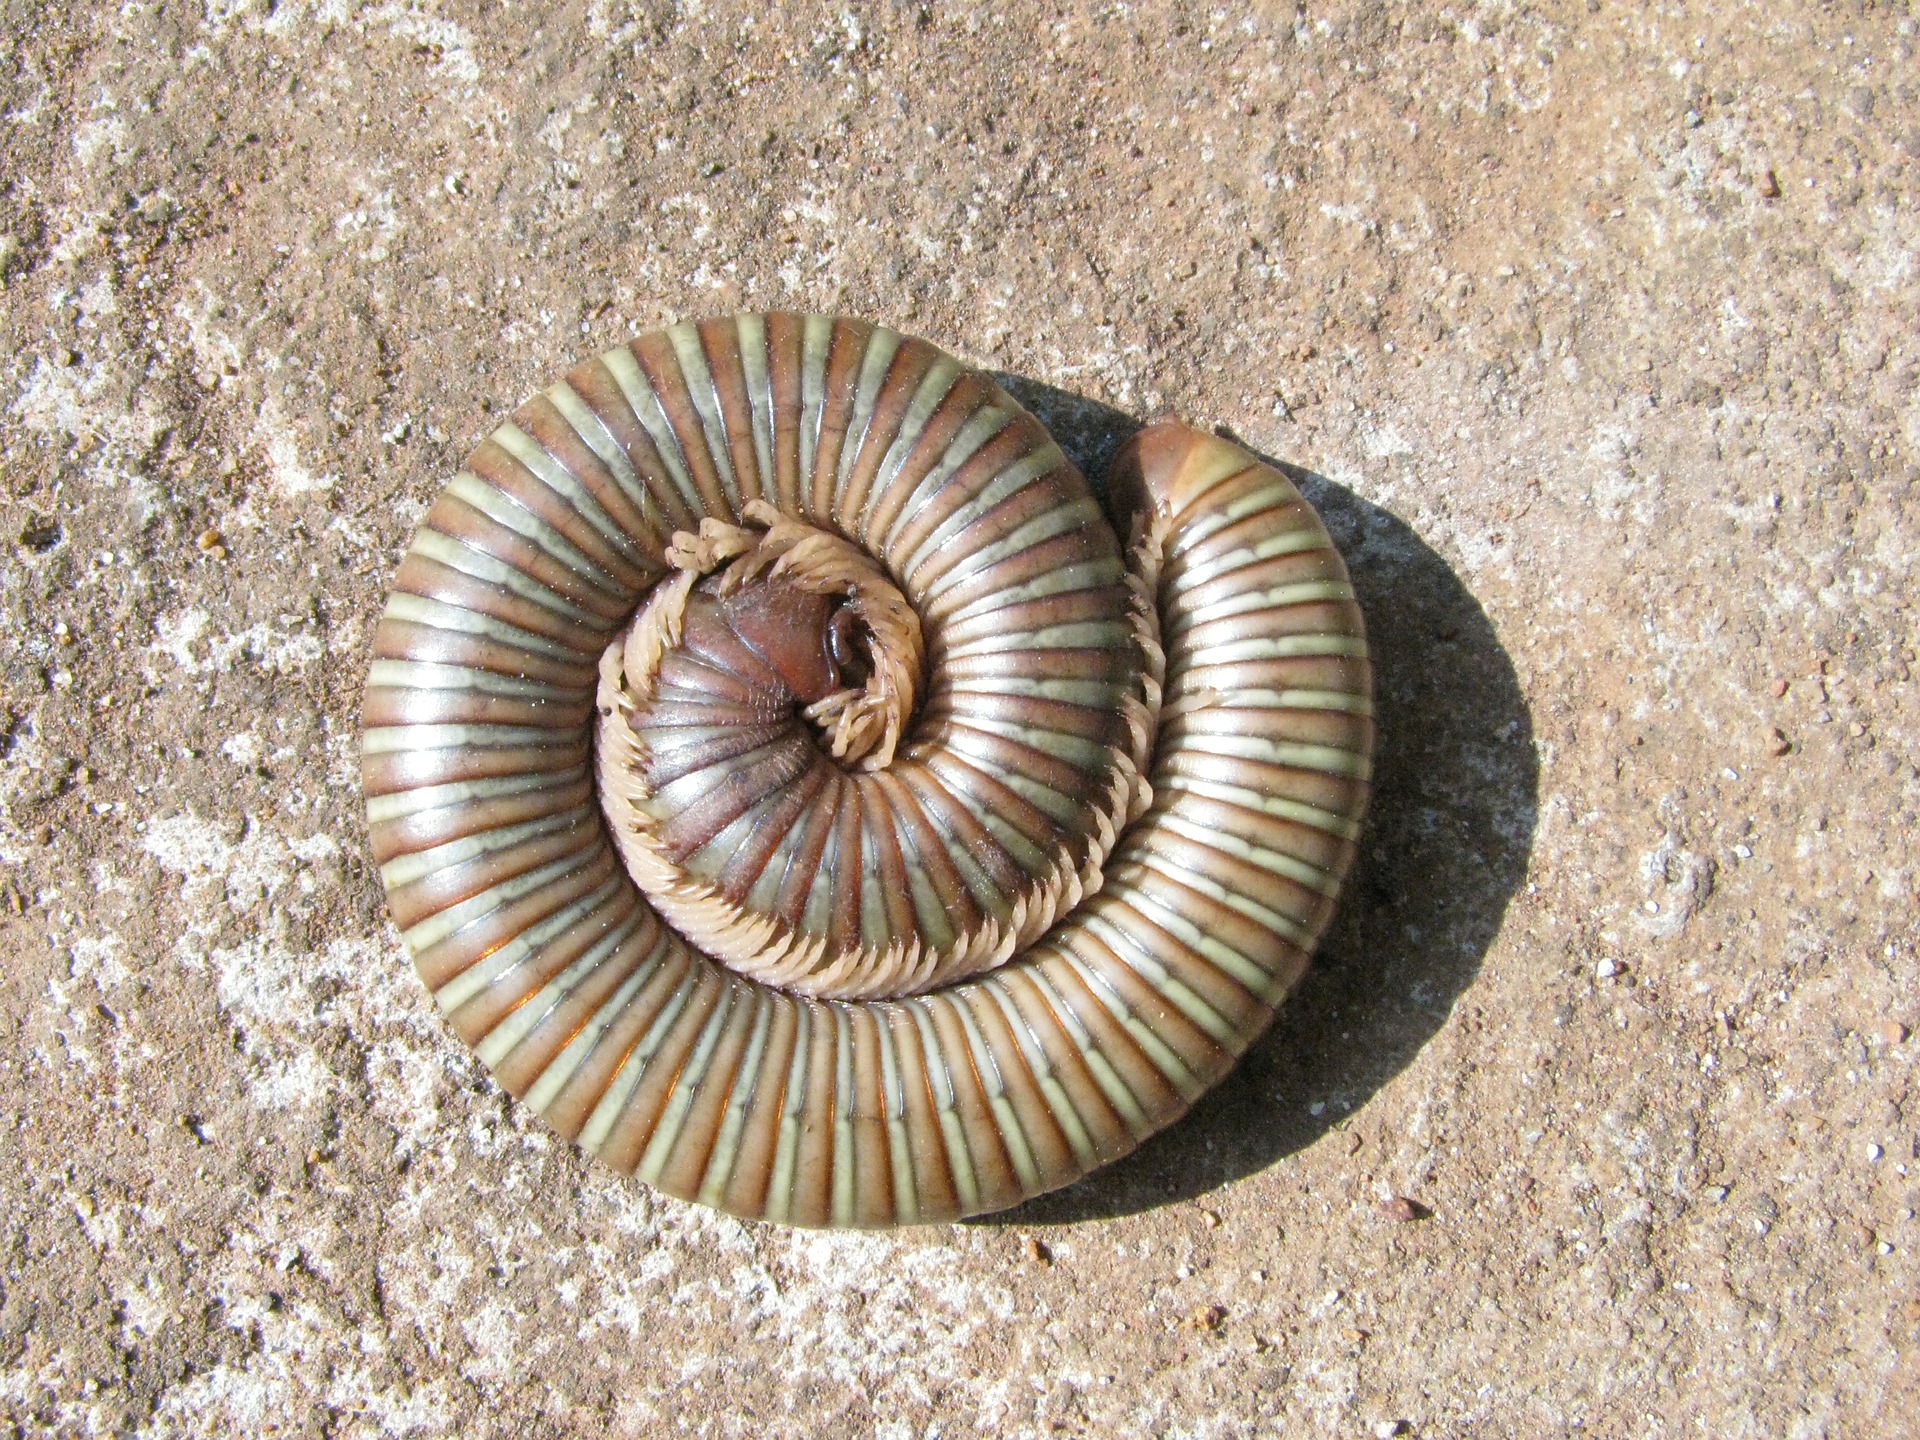 A desert millipede coiled up on the sand